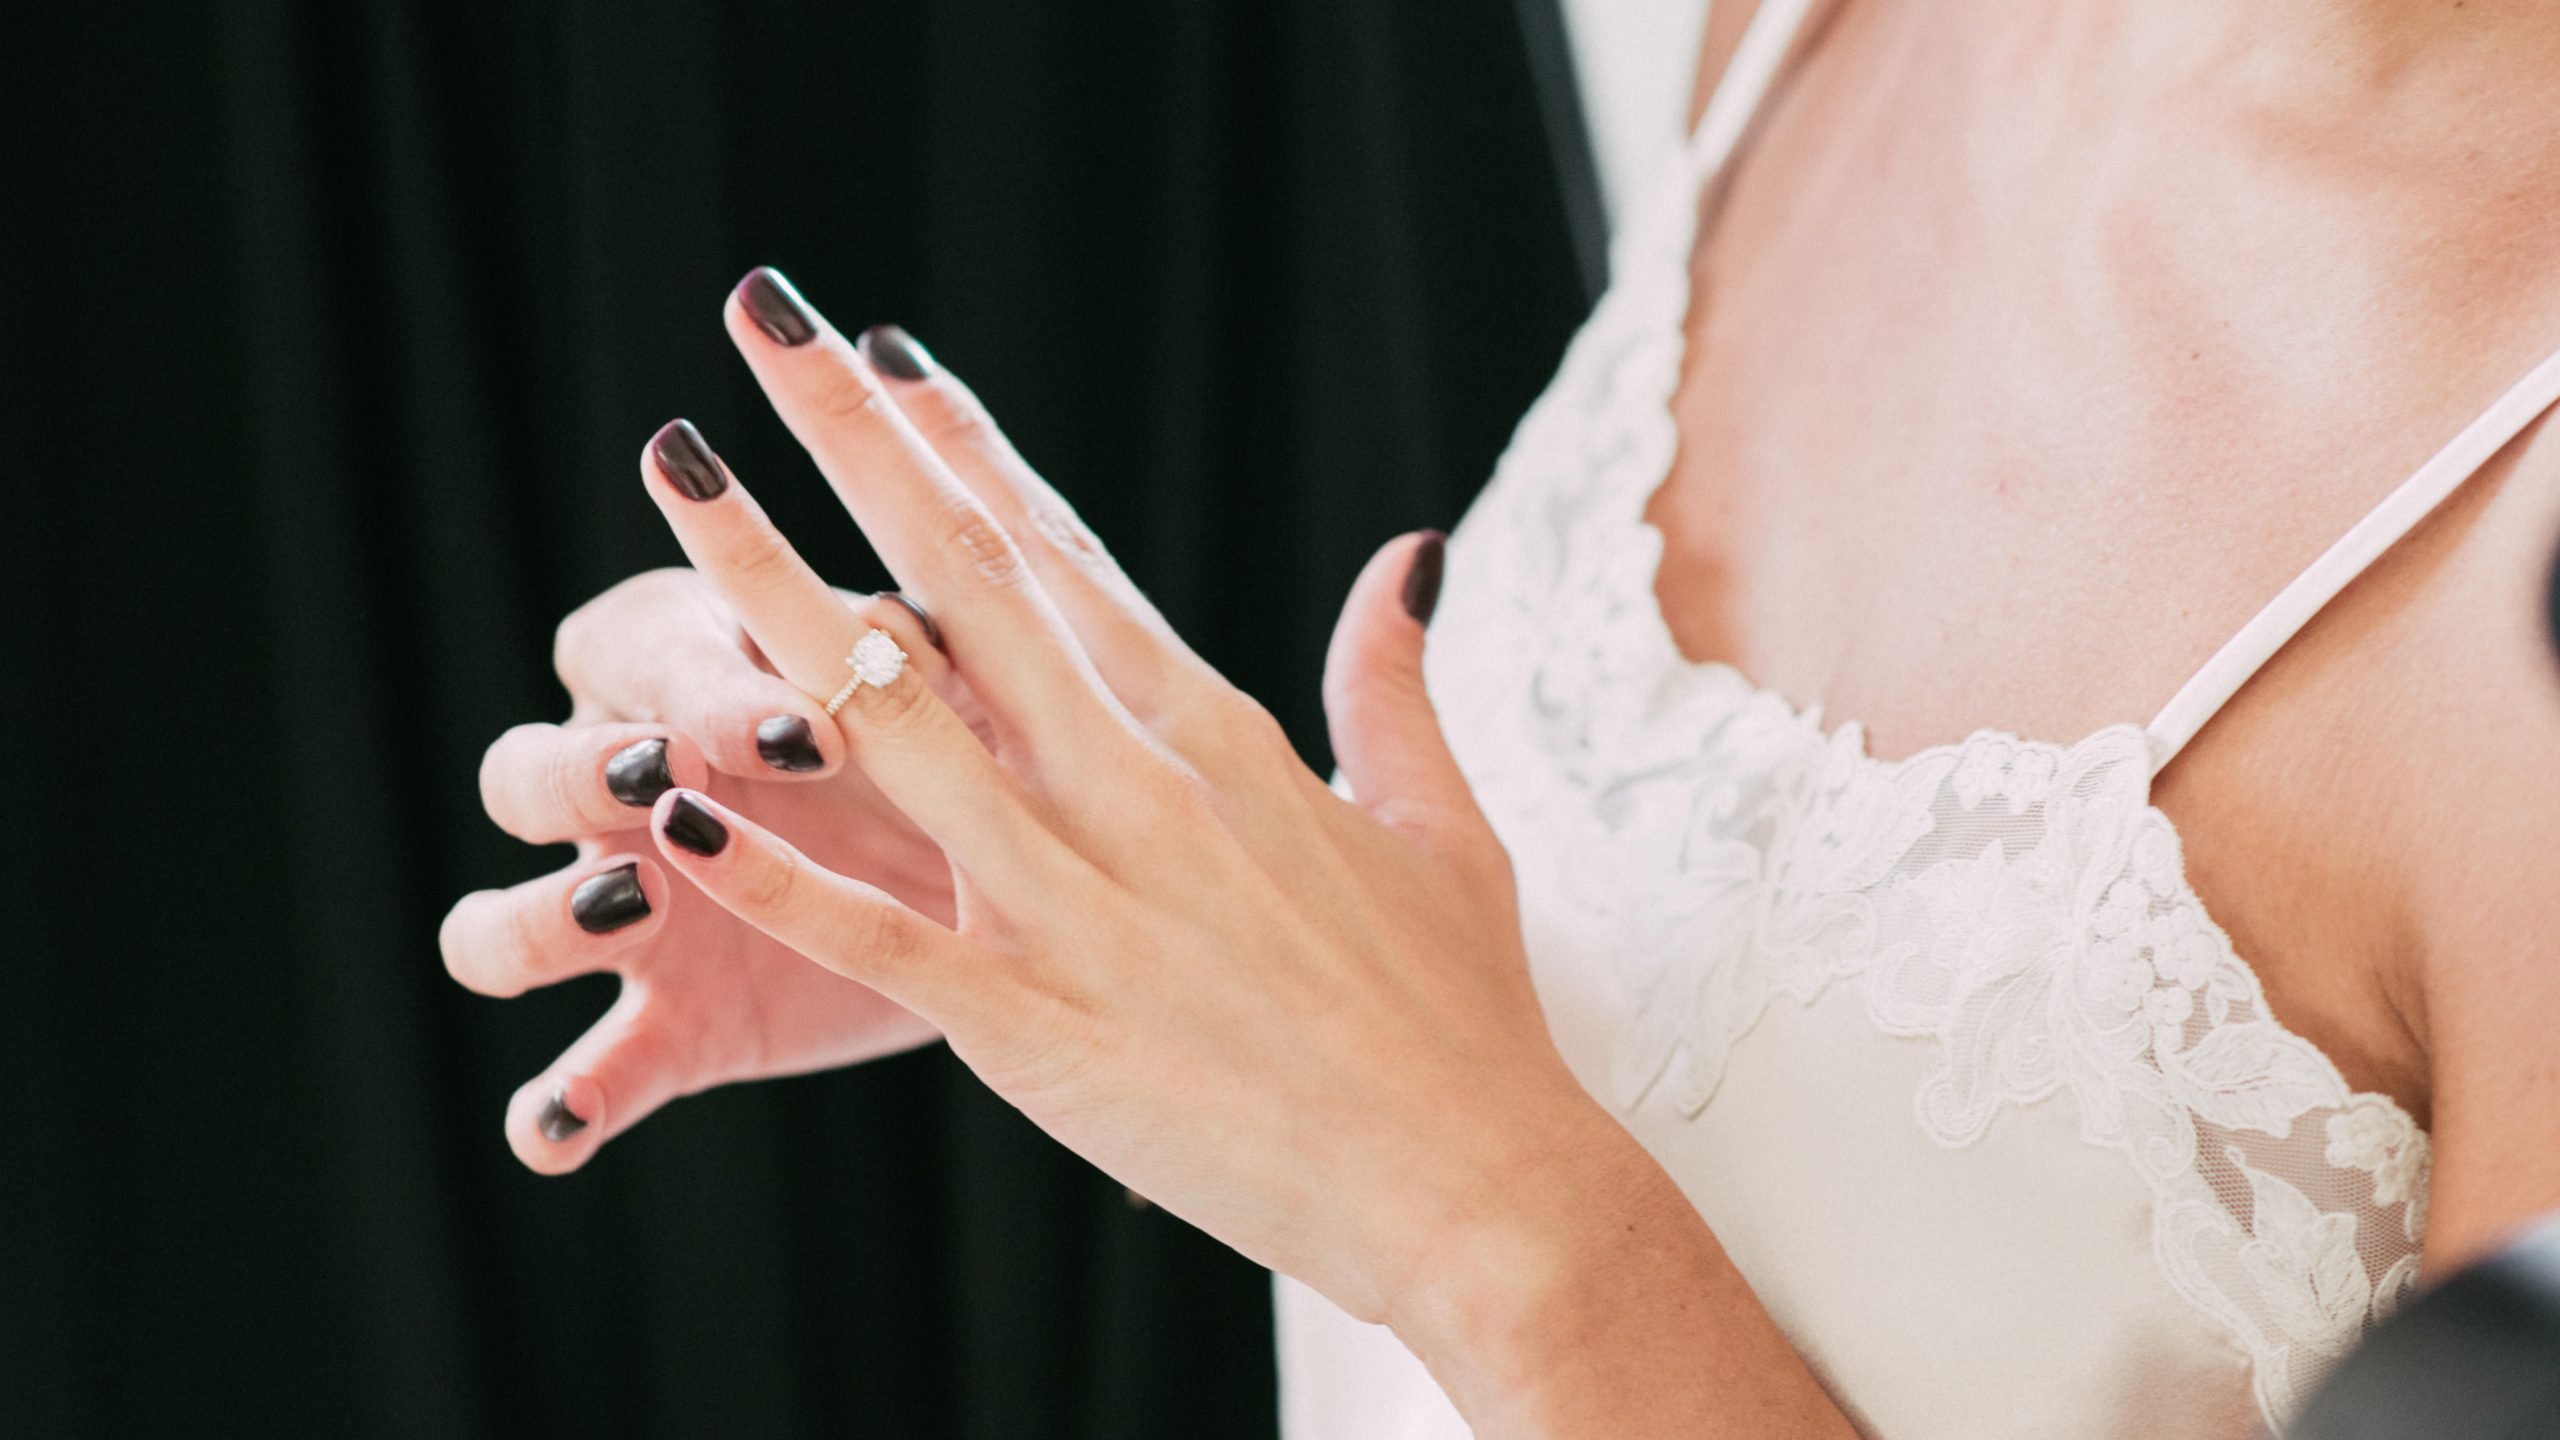 Wedding Traditions: Why Is the Wedding Ring Worn on the Left Hand?